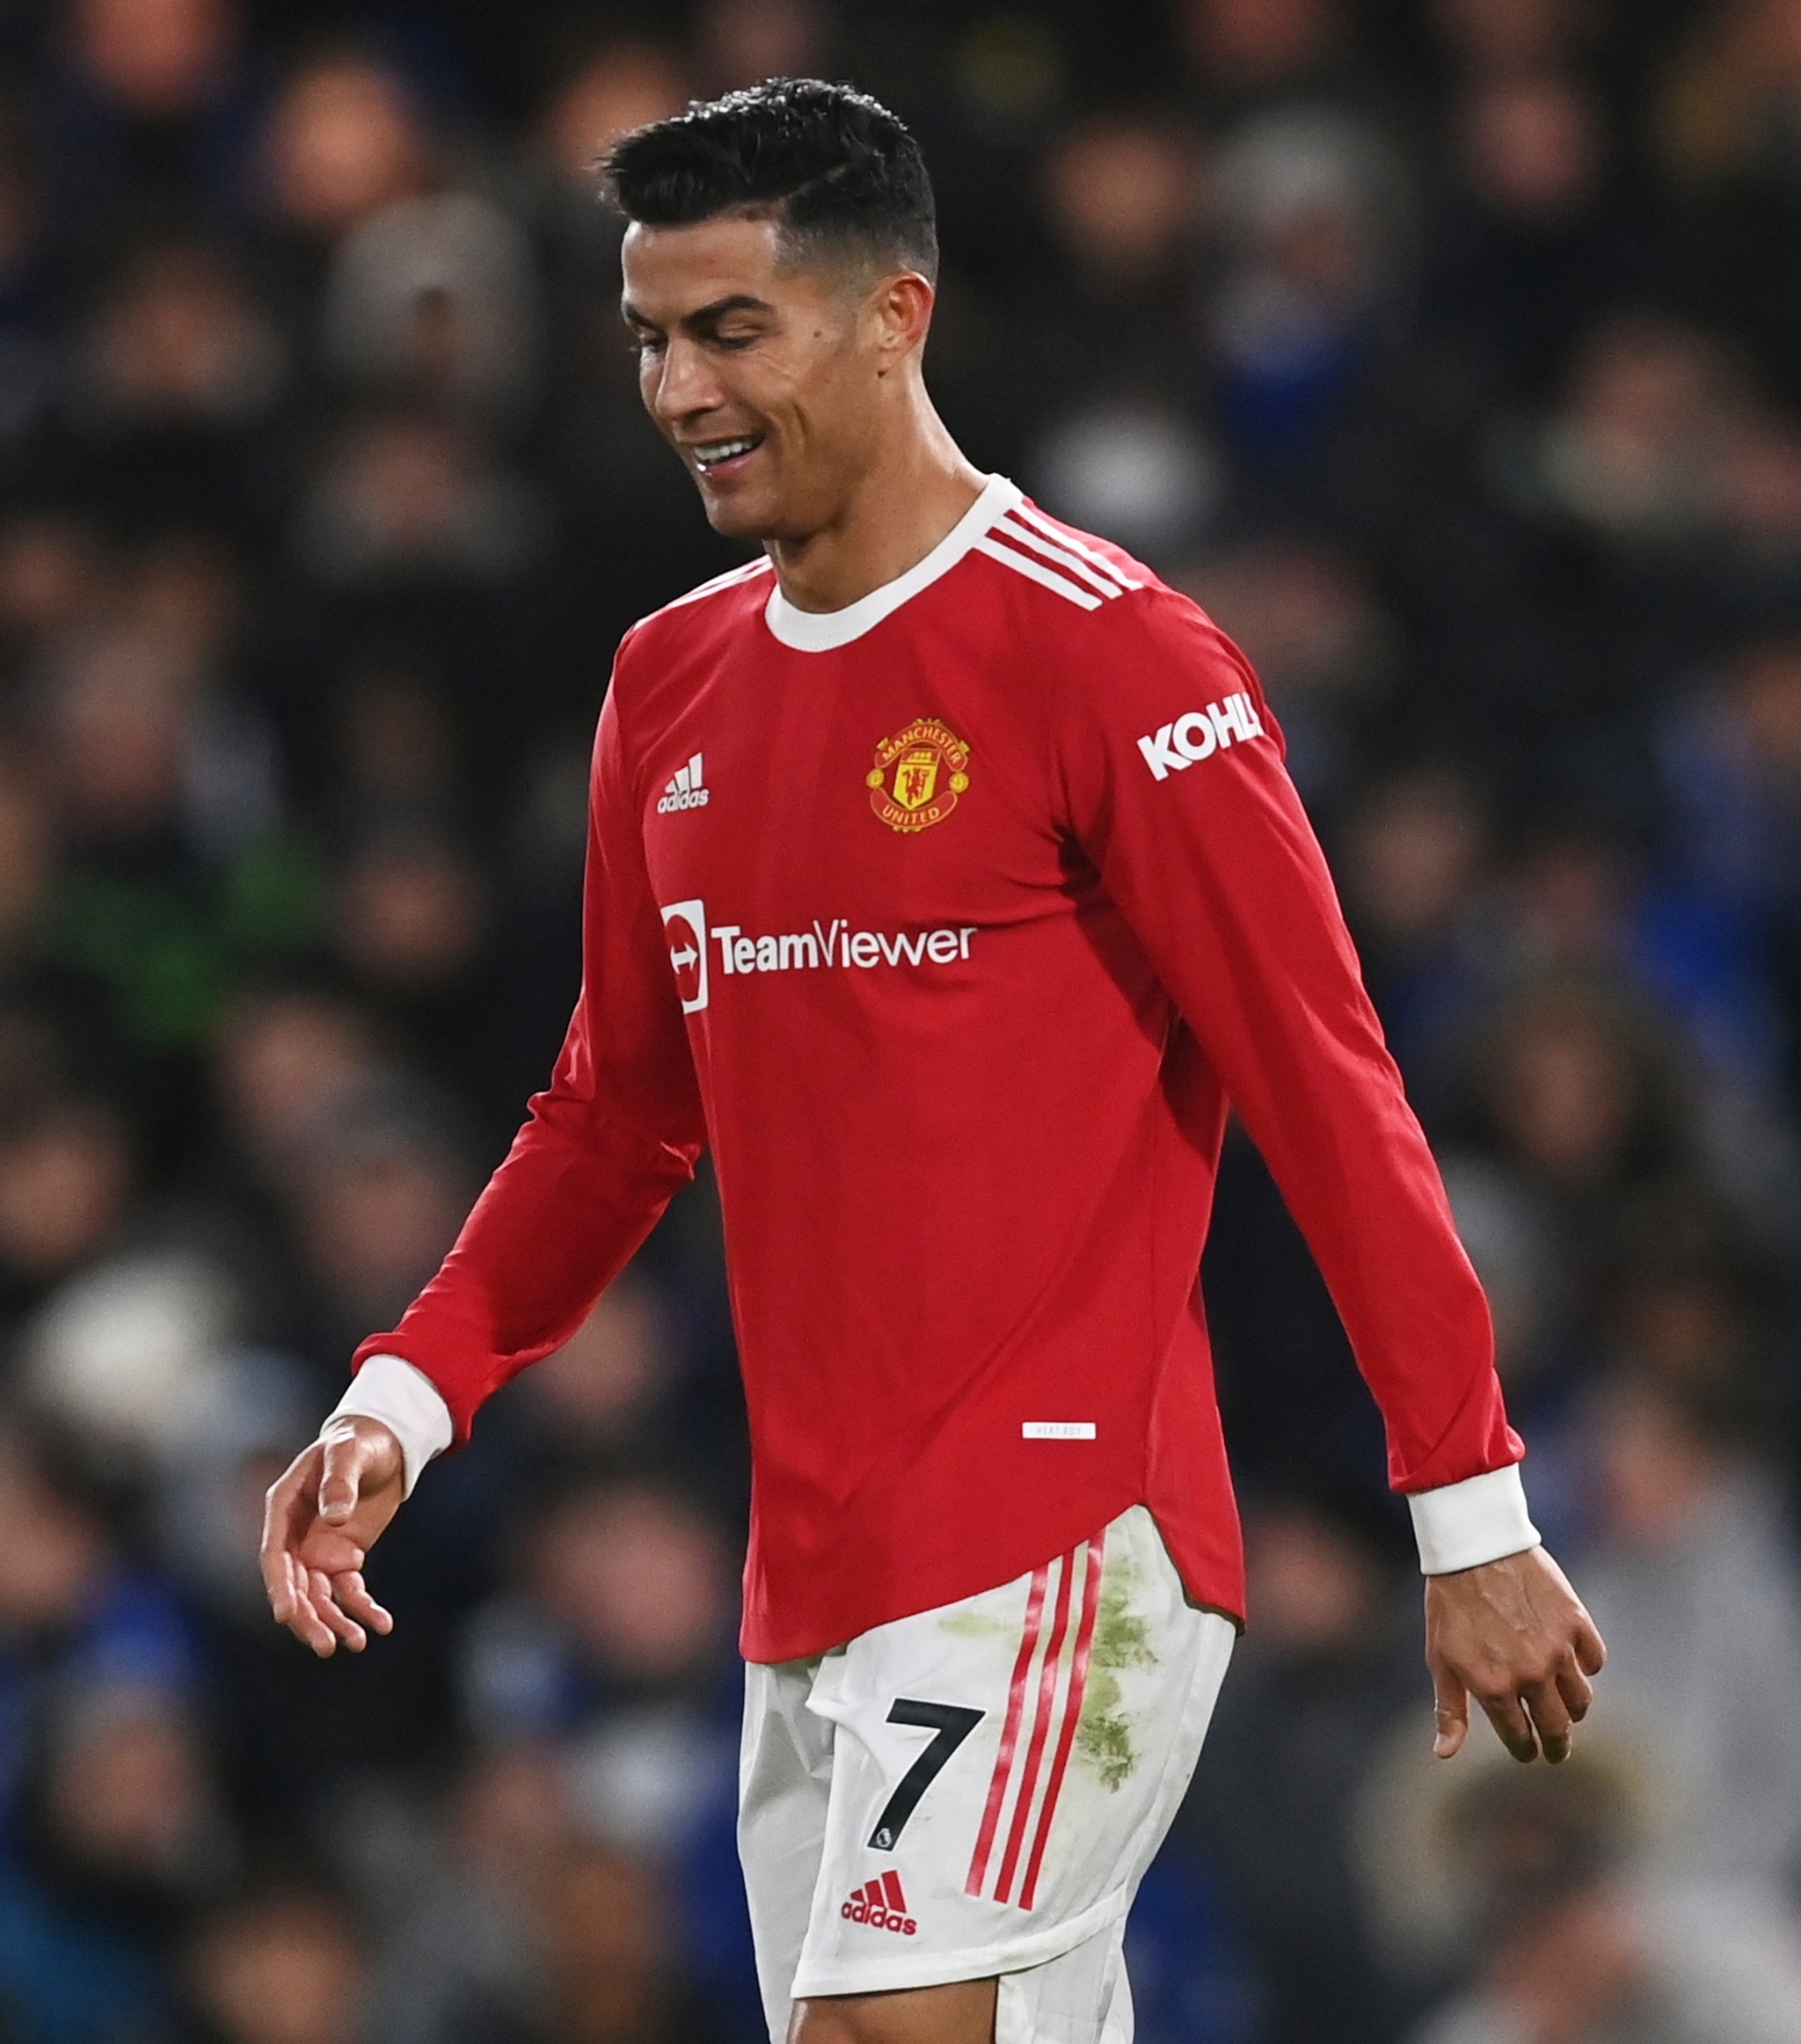 London (United Kingdom), 28/11/2021.- Manchester United's lt;HIT gt;Cristiano lt;/HIT gt; lt;HIT gt;Ronaldo lt;/HIT gt; reacts during the English Premier League soccer match between Chelsea FC and Manchester United in London, Britain, 28 November 2021. (Reino Unido, Londres) EFE/EPA/NEIL HALL EDITORIAL USE ONLY. No use with unauthorized audio, video, data, fixture lists, club/league logos or 'live' services. Online in-match use limited to 120 images, no video emulation. No use in betting, games or single club/league/player publications